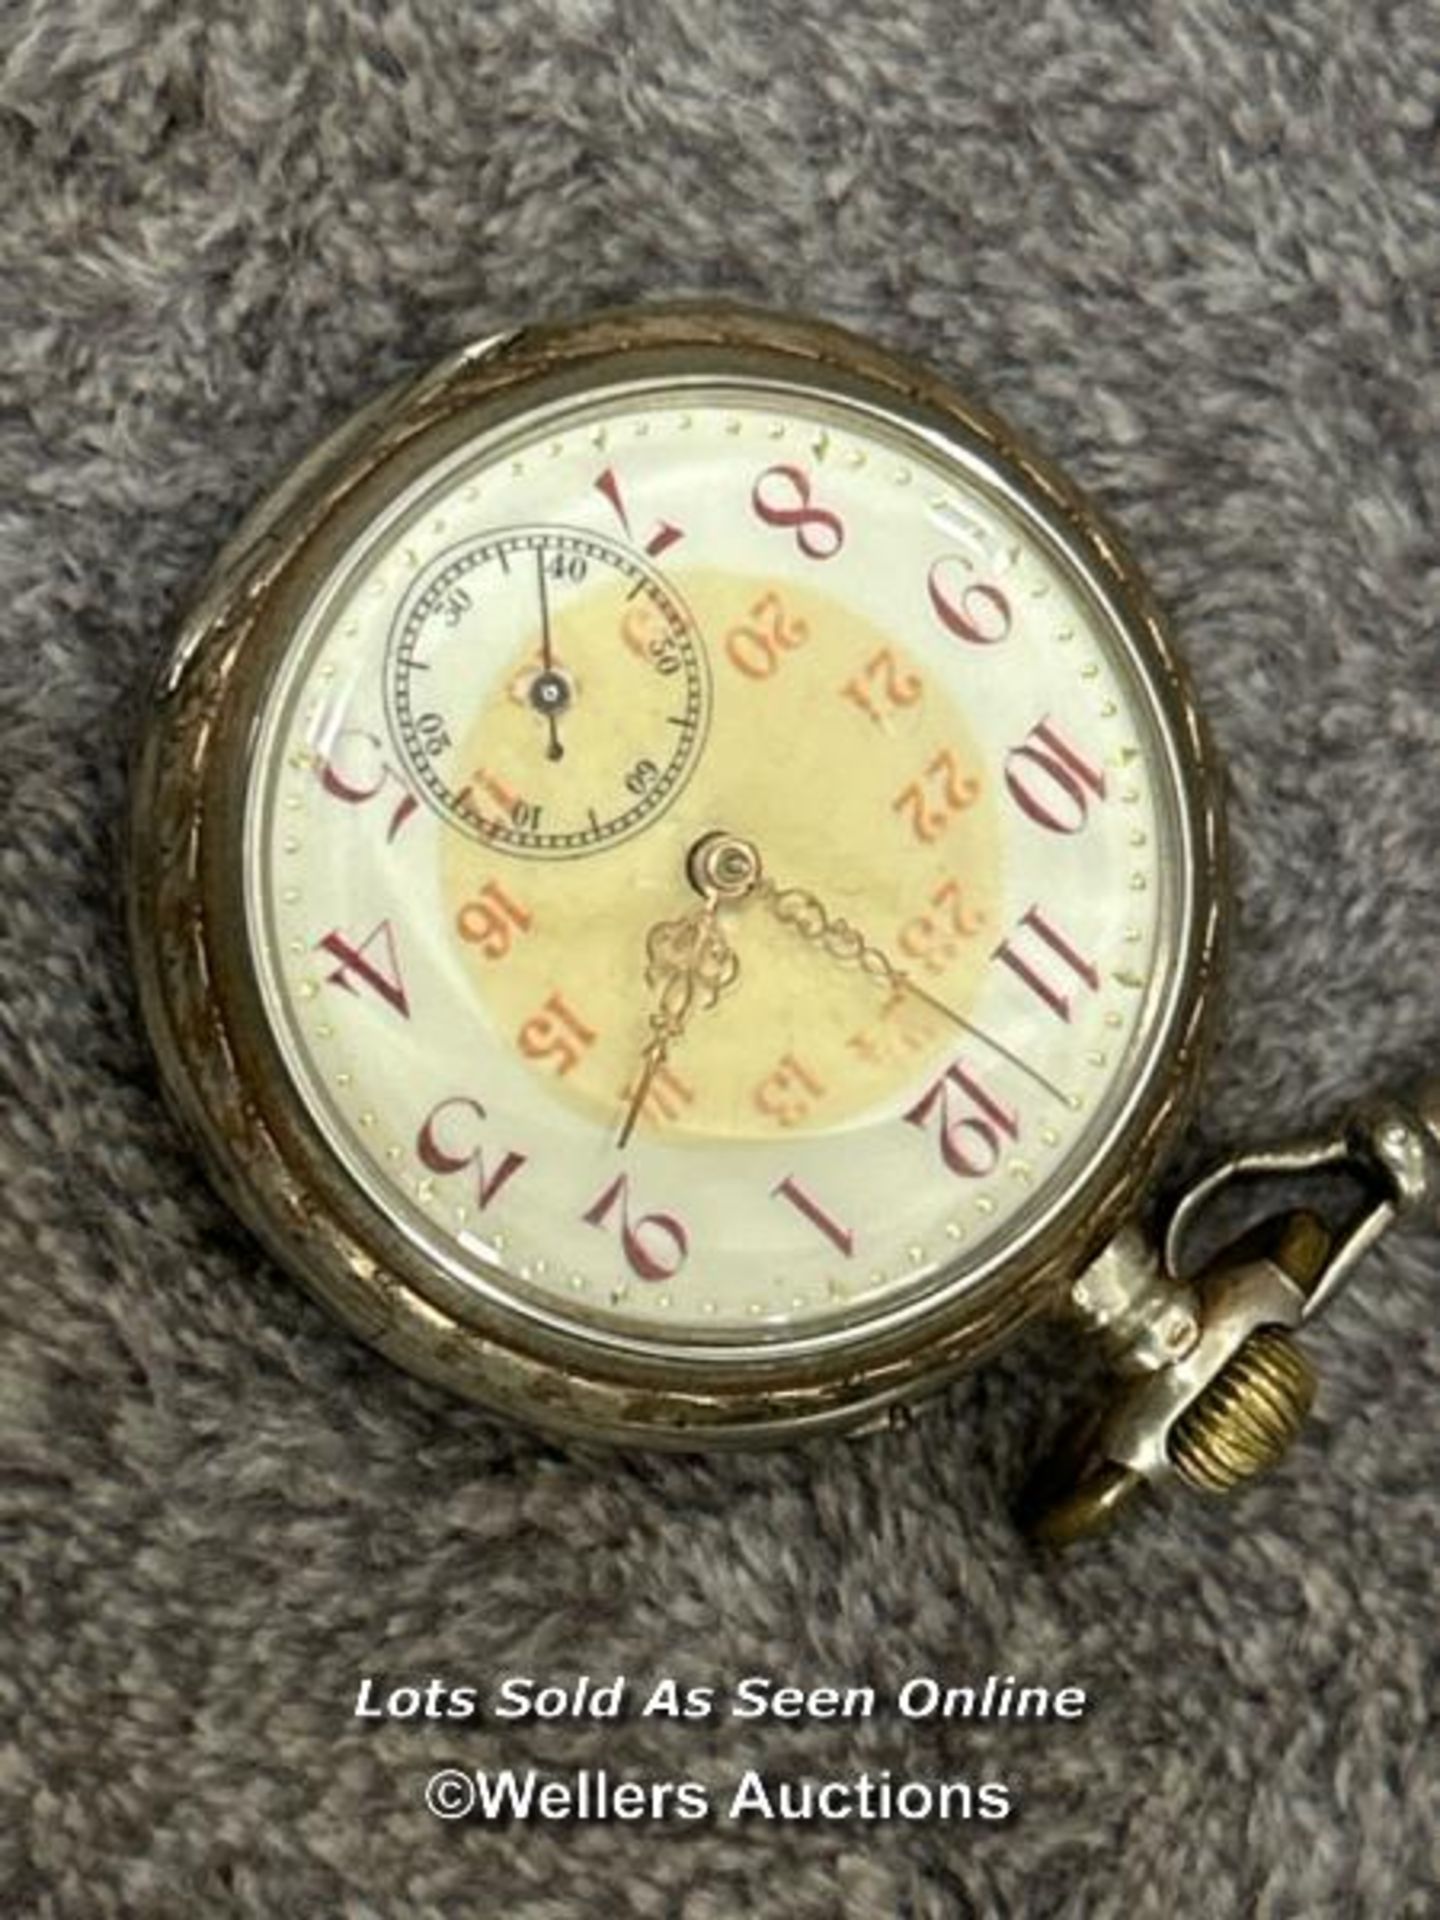 Three open face pocket watches, two with watch chains, a pendant watch on chain, a silver napkin - Image 10 of 13